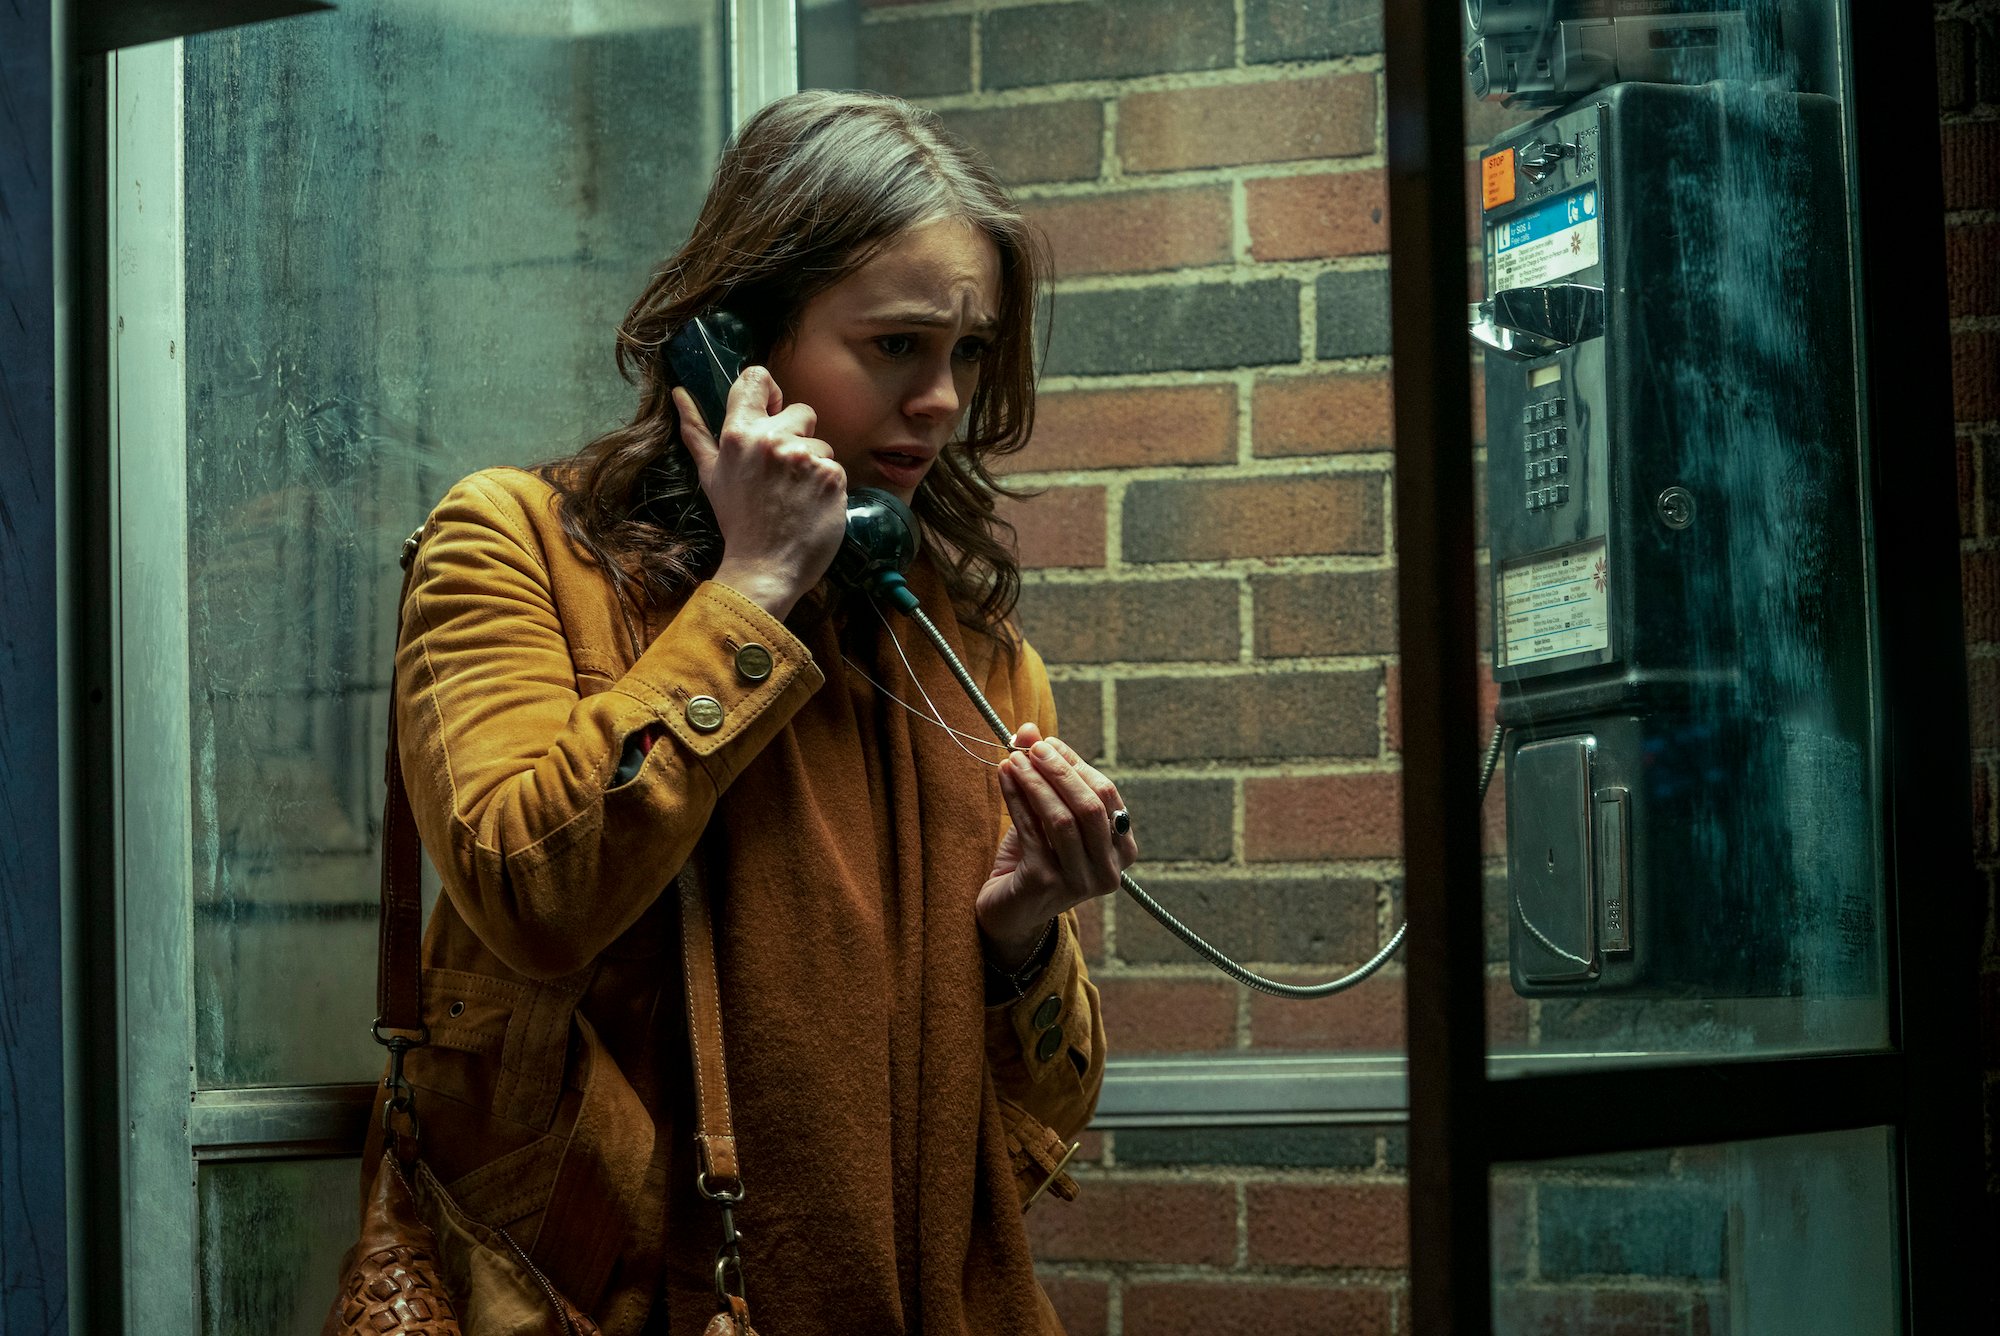 Dina Shihabi as Melody Pendras talking on a payphone and wearing a mustard colored jacket in a production still from 'Archive 81.'